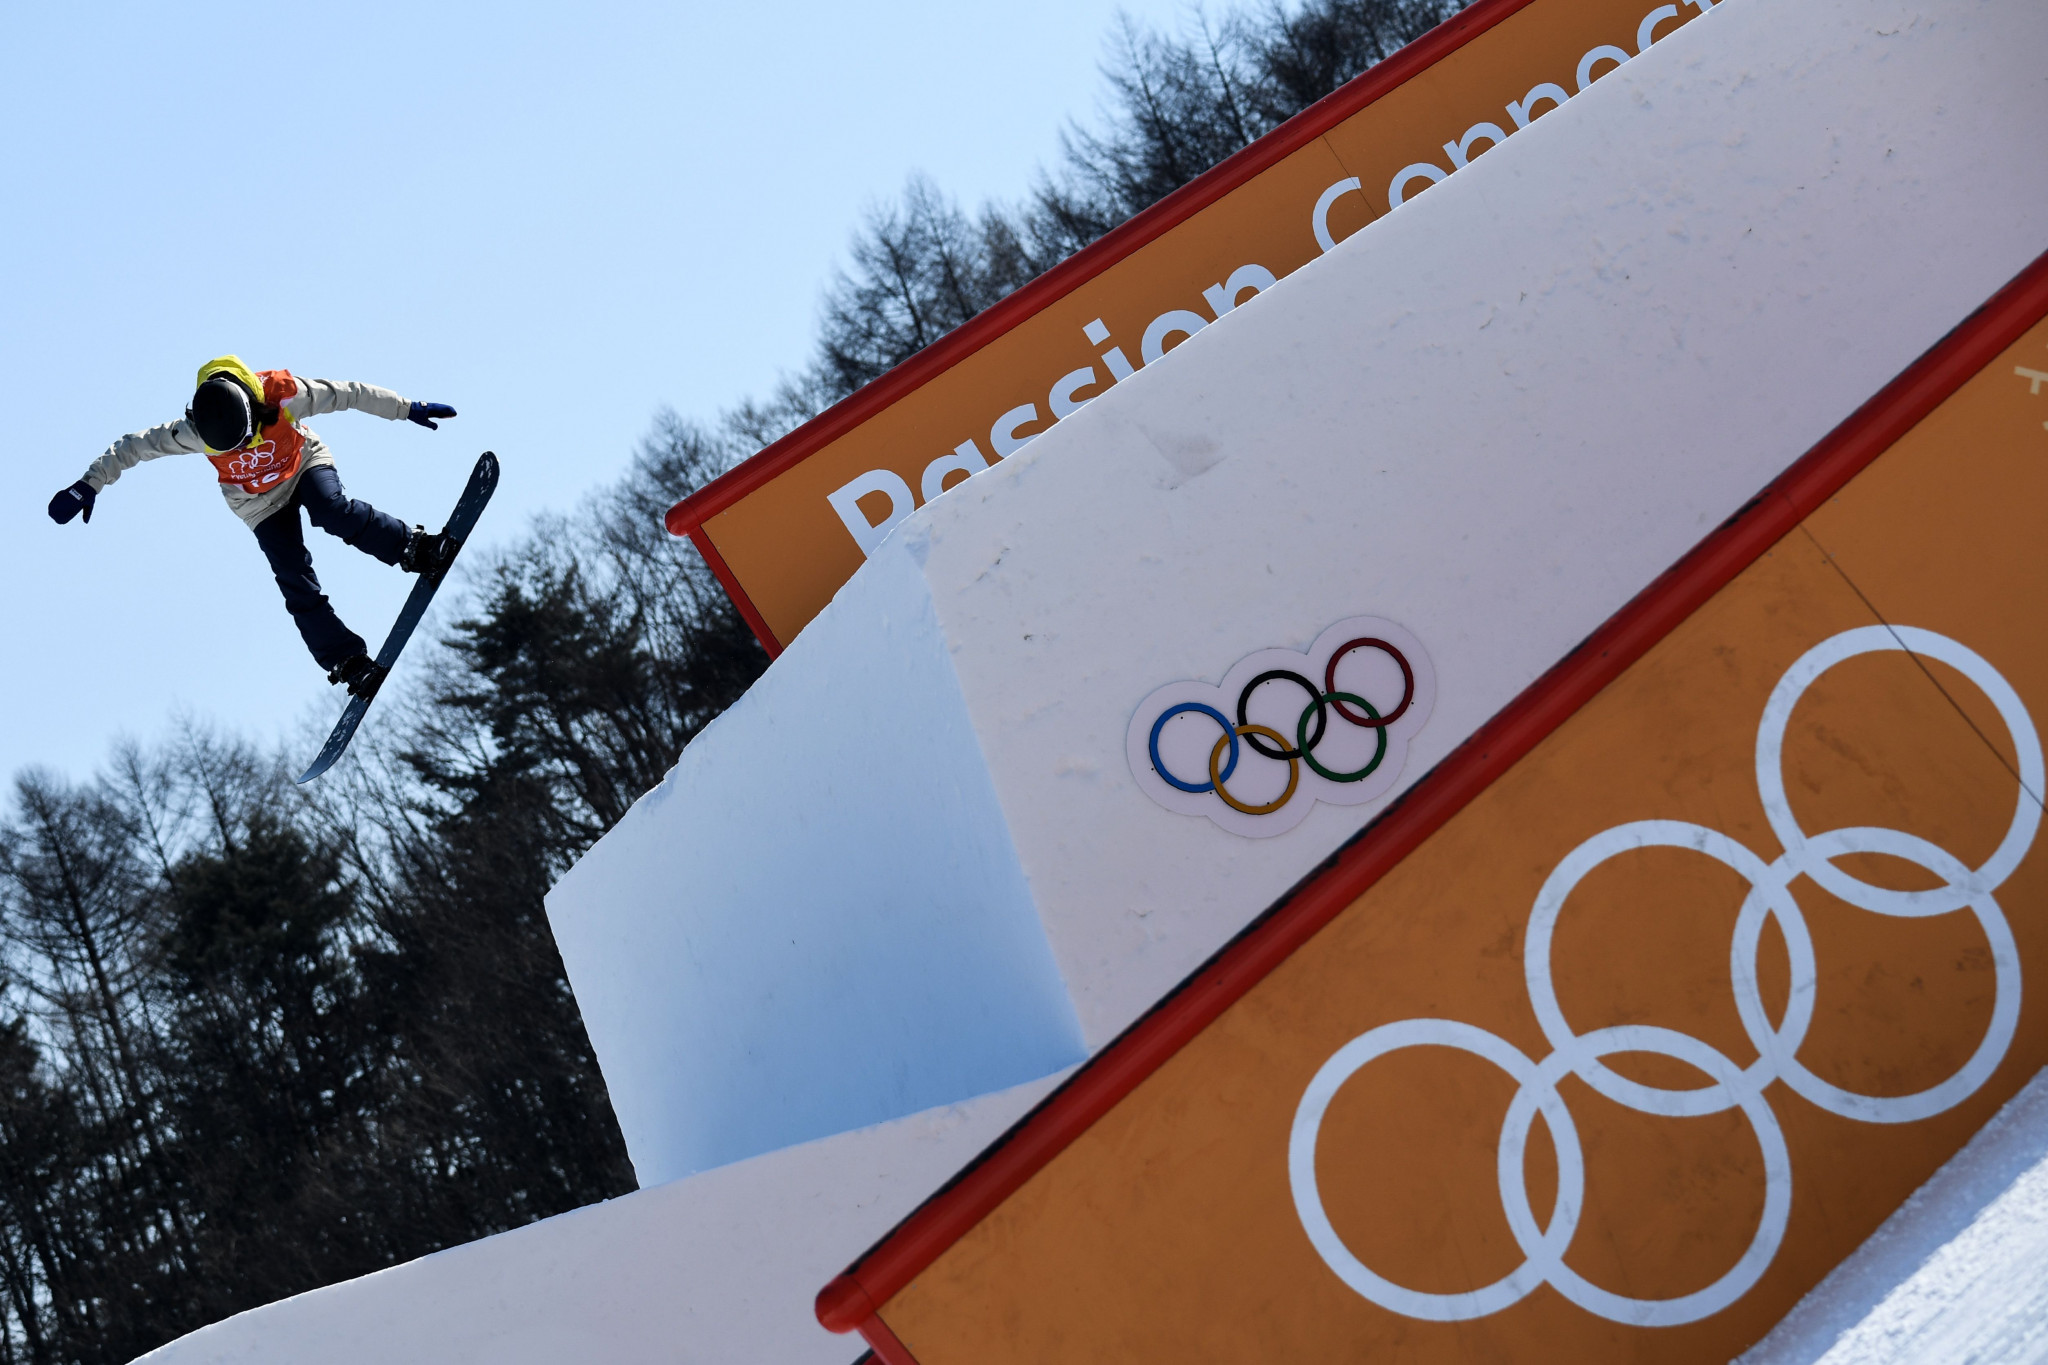 British snowboarder Ormerod encouraged by Beijing 2022's push for green Olympics